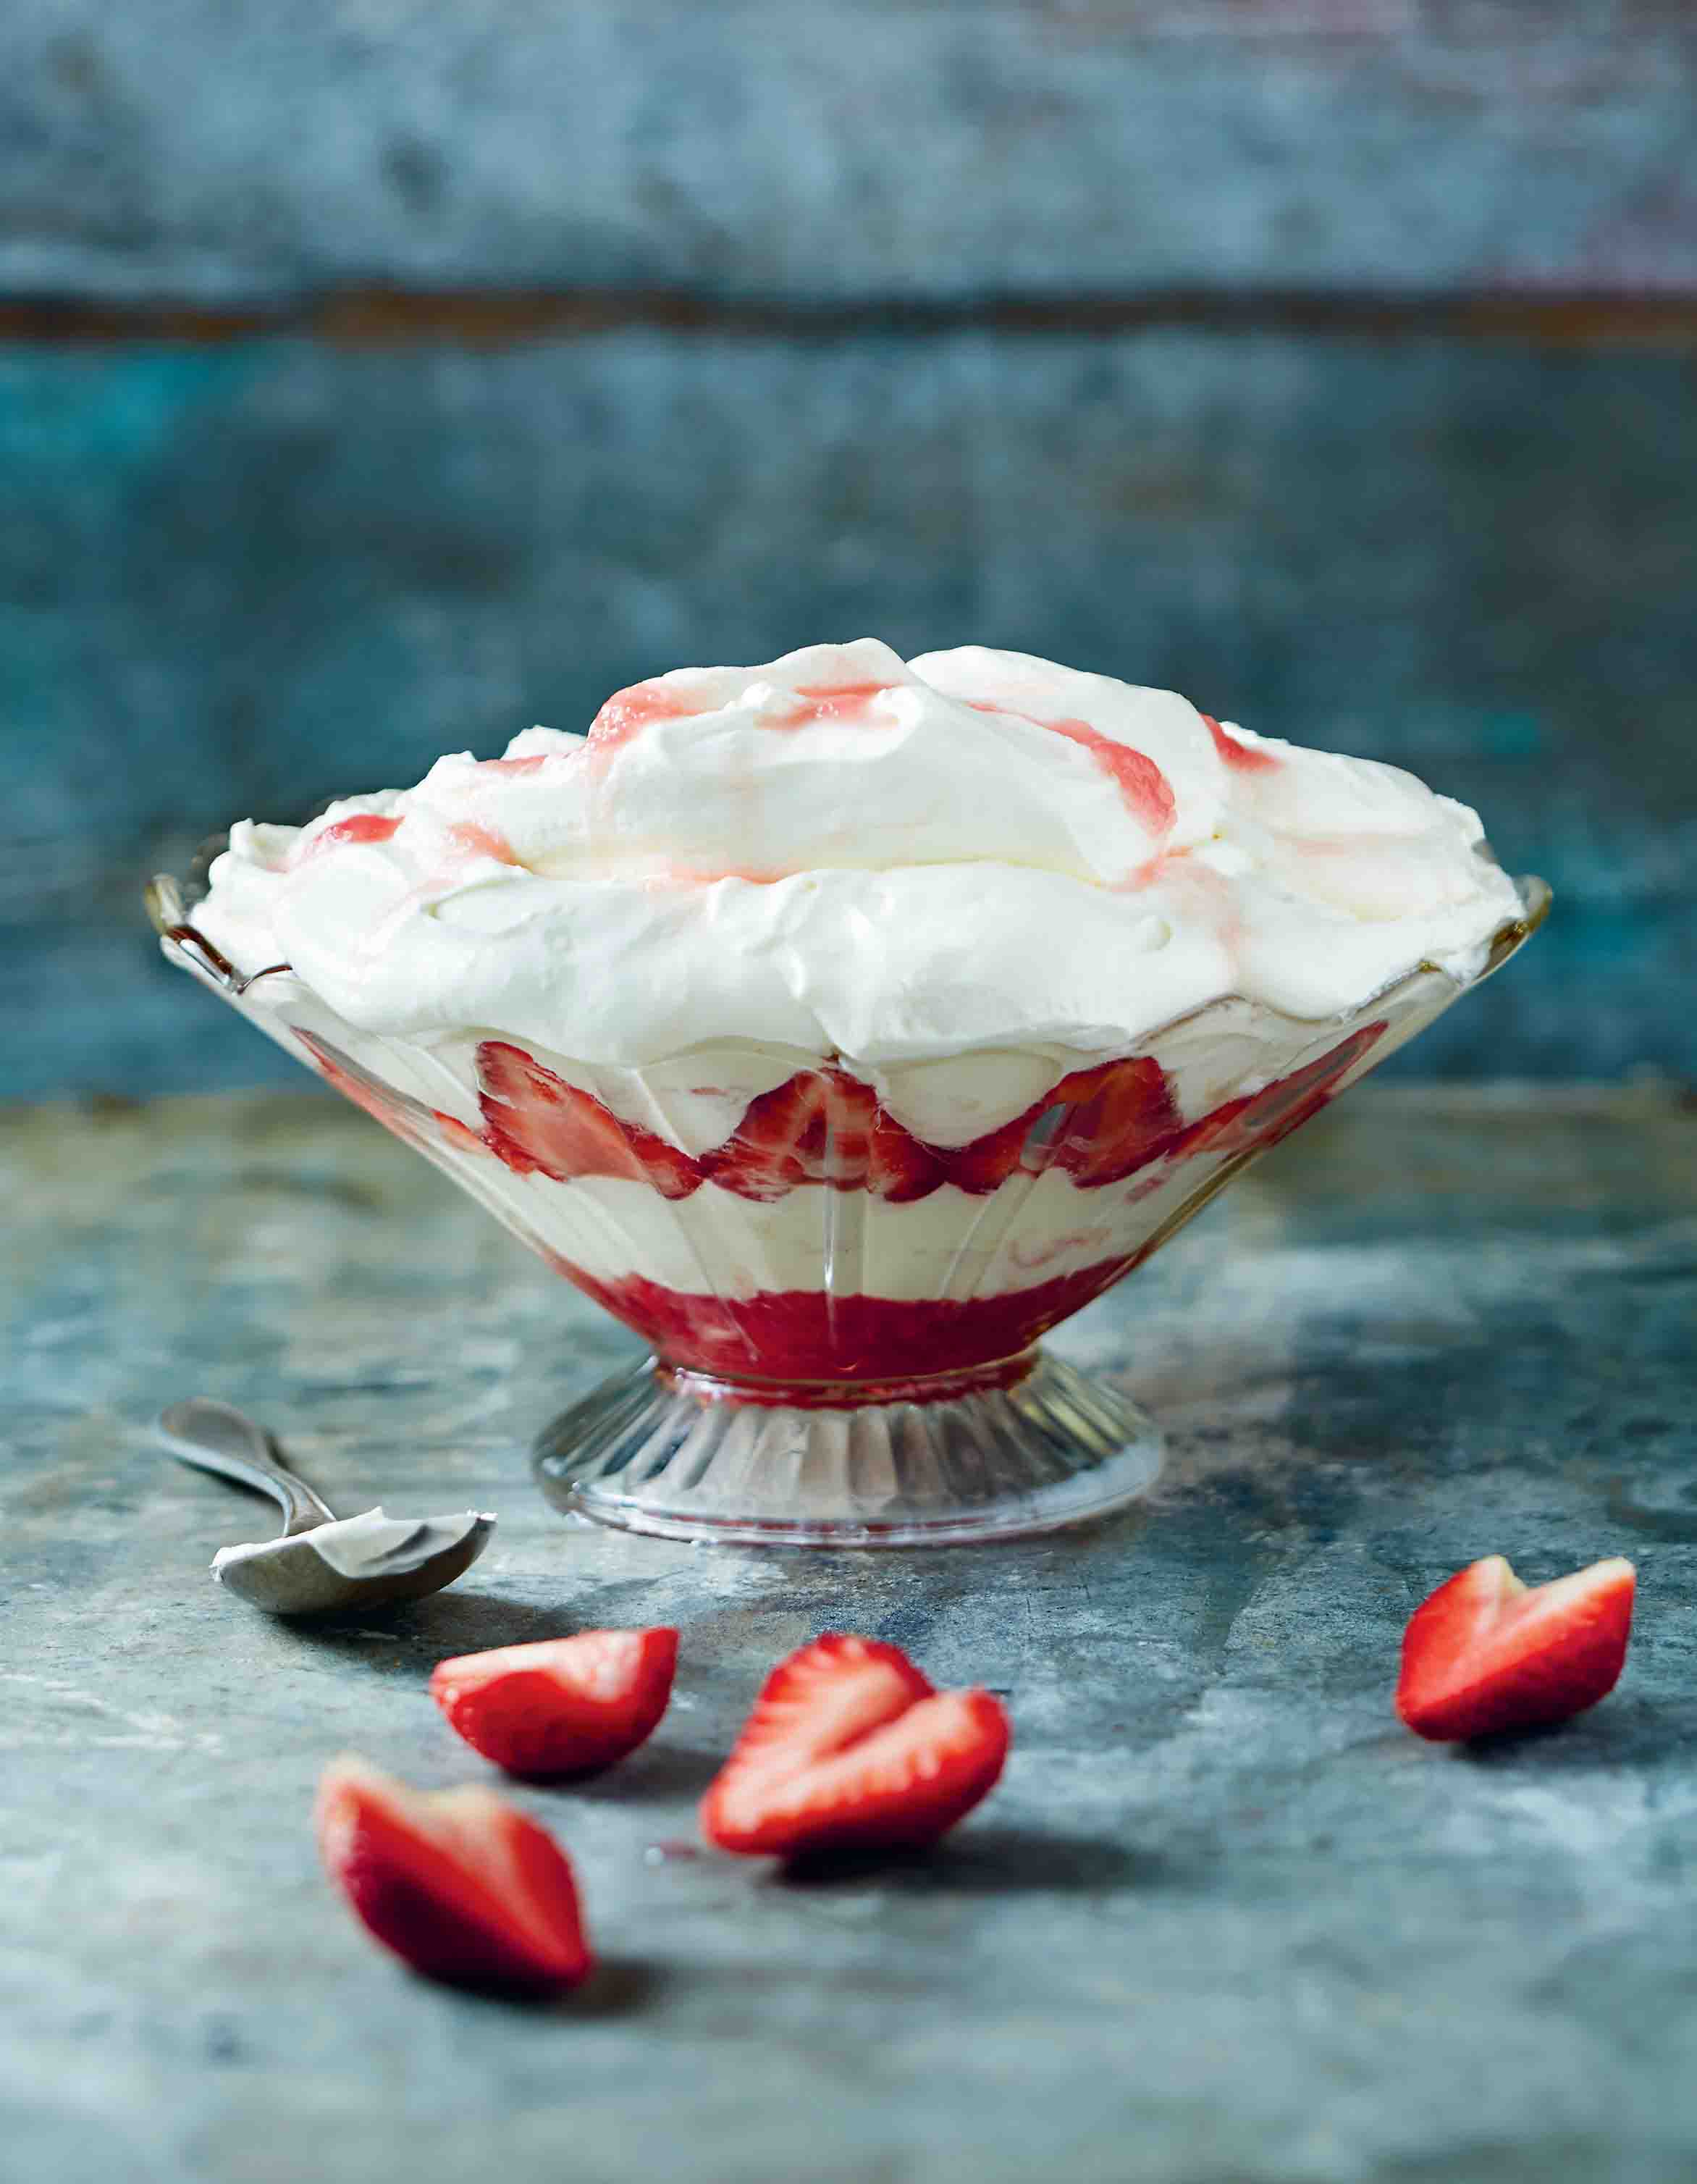 Strawberry rhubarb fool with rose-scented shortbread